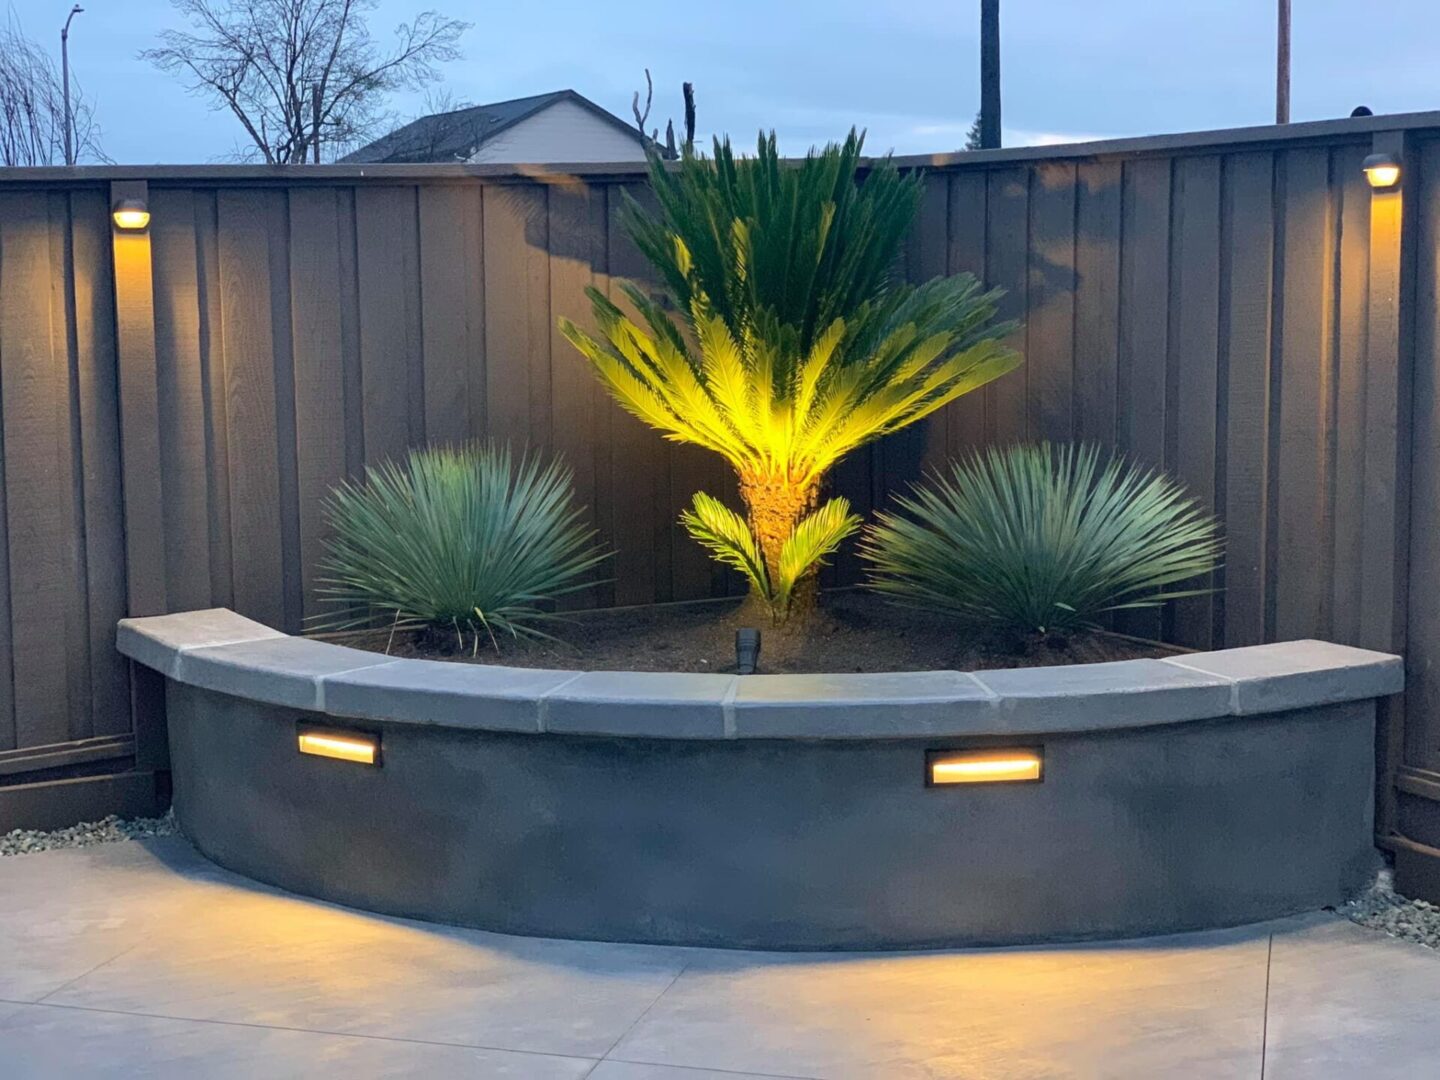 landscape lighting project with plants and path lights by Guys Yard Design in Sonoma, CA